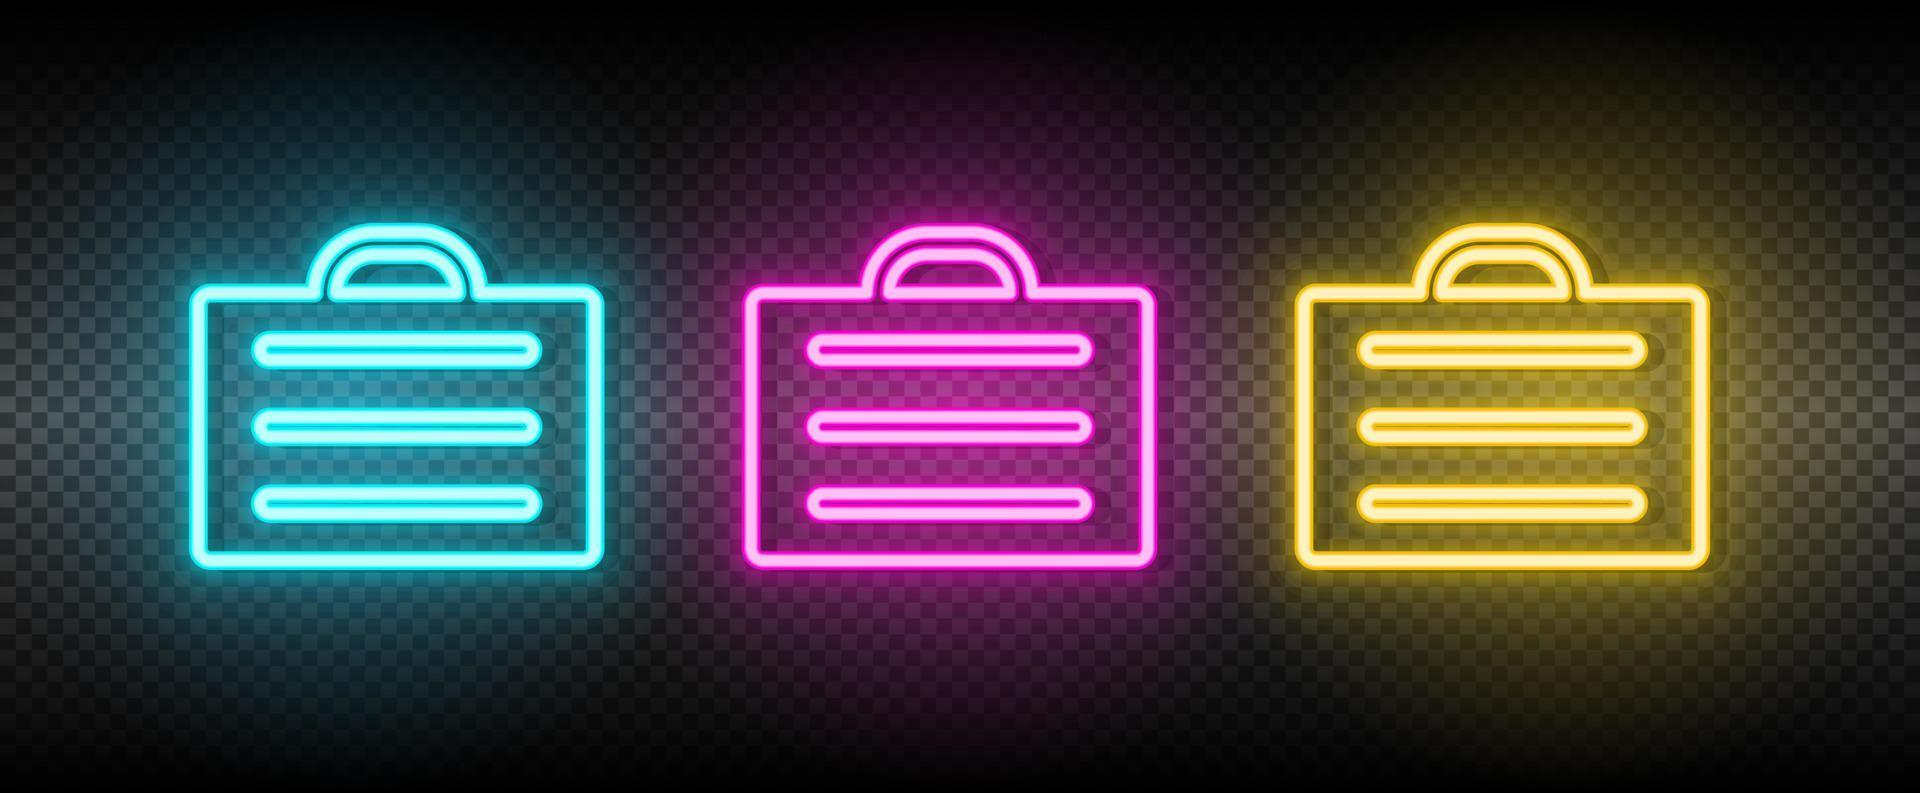 briefcase, business, product neon vector icon. Illustration neon blue, yellow, red icon set